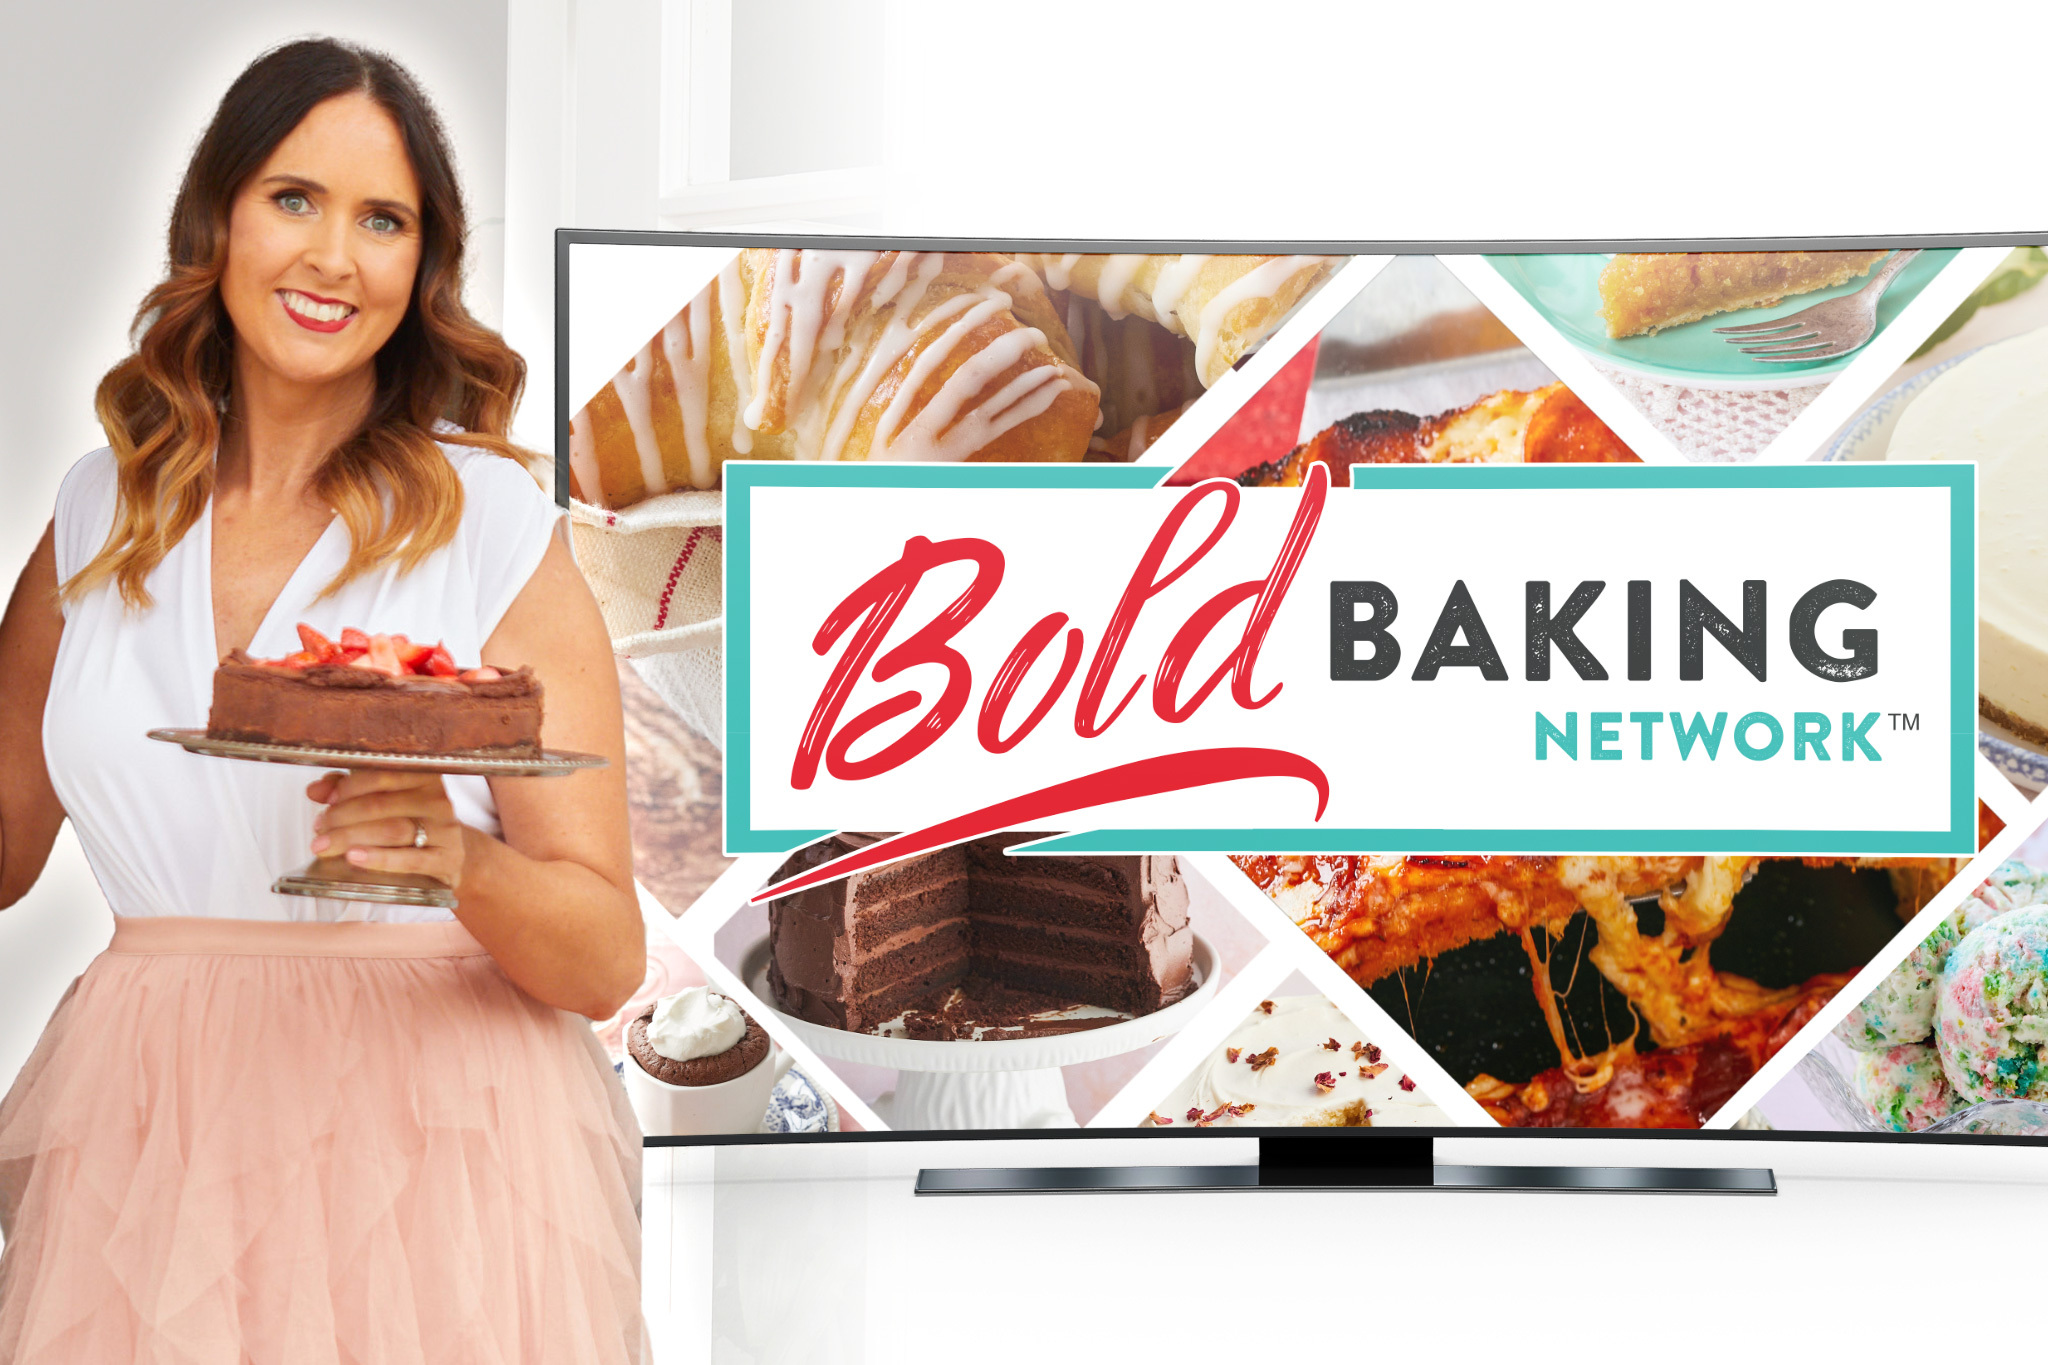 Bold Baking Network logo on a television with Chef Gemma Stafford